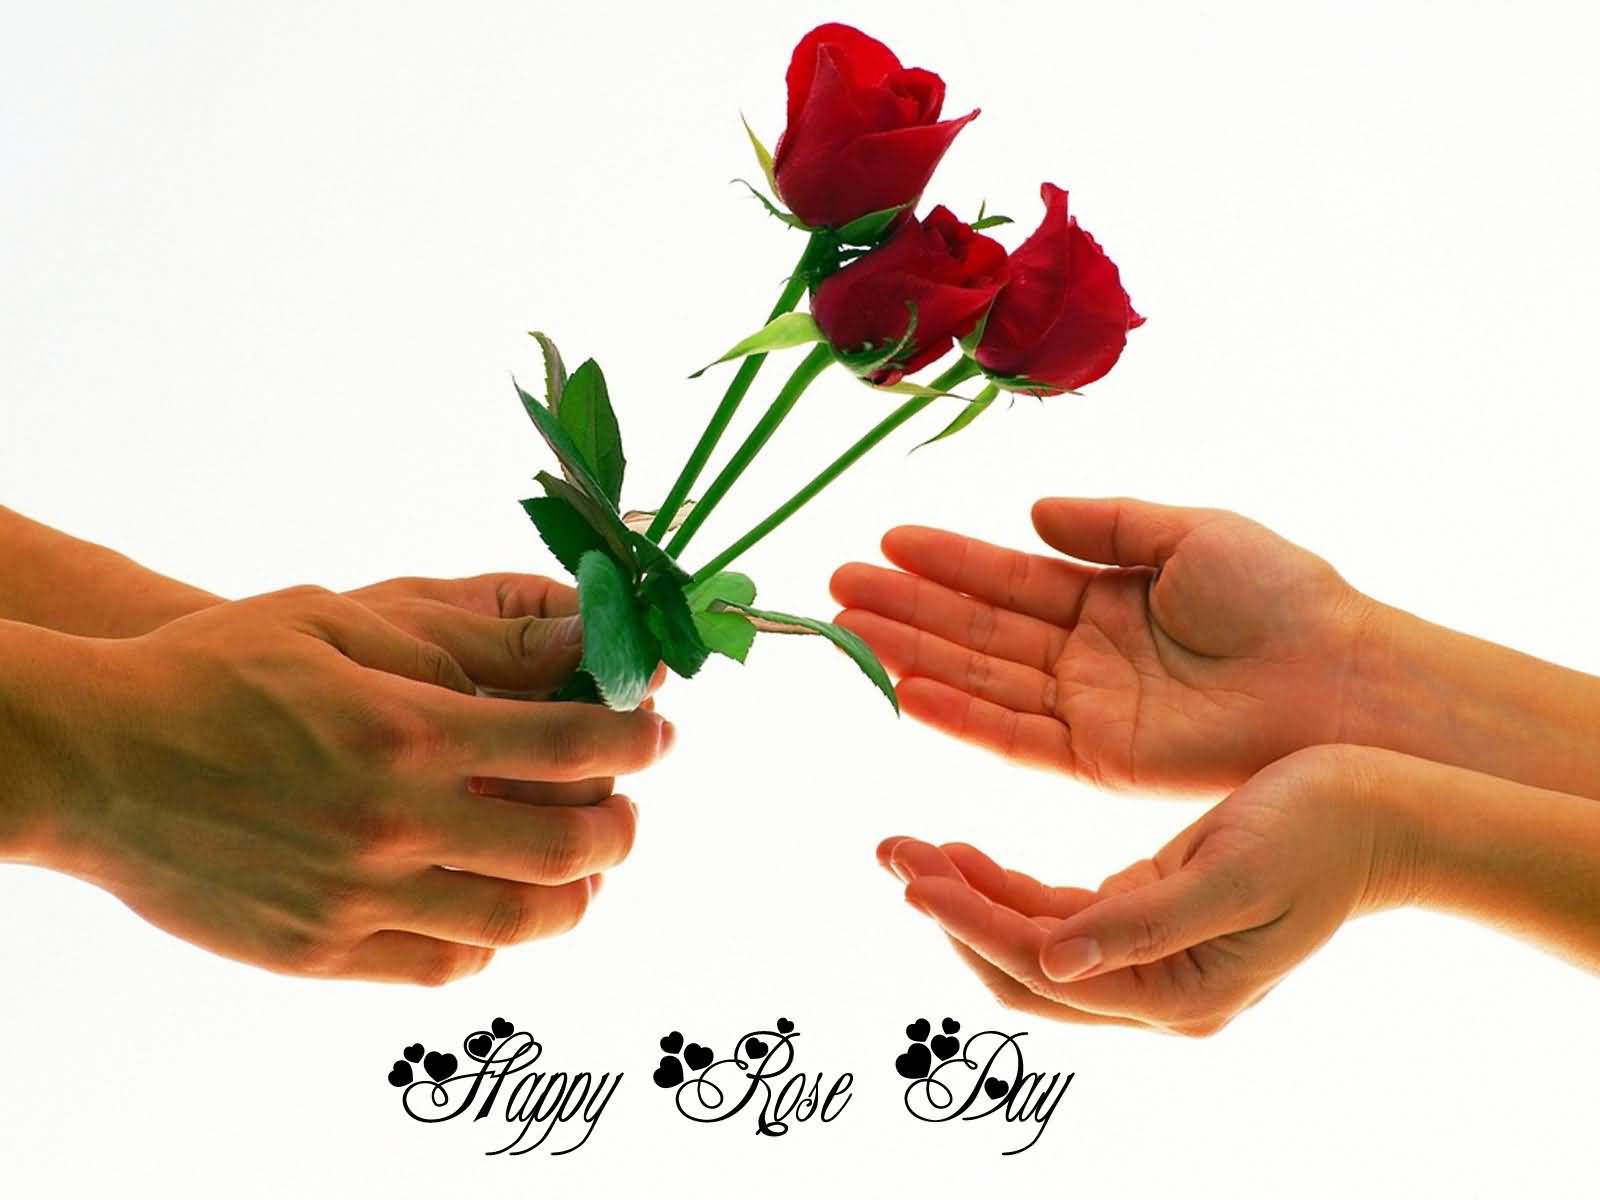 Happy Rose Day Three Roses For You Greeting Card